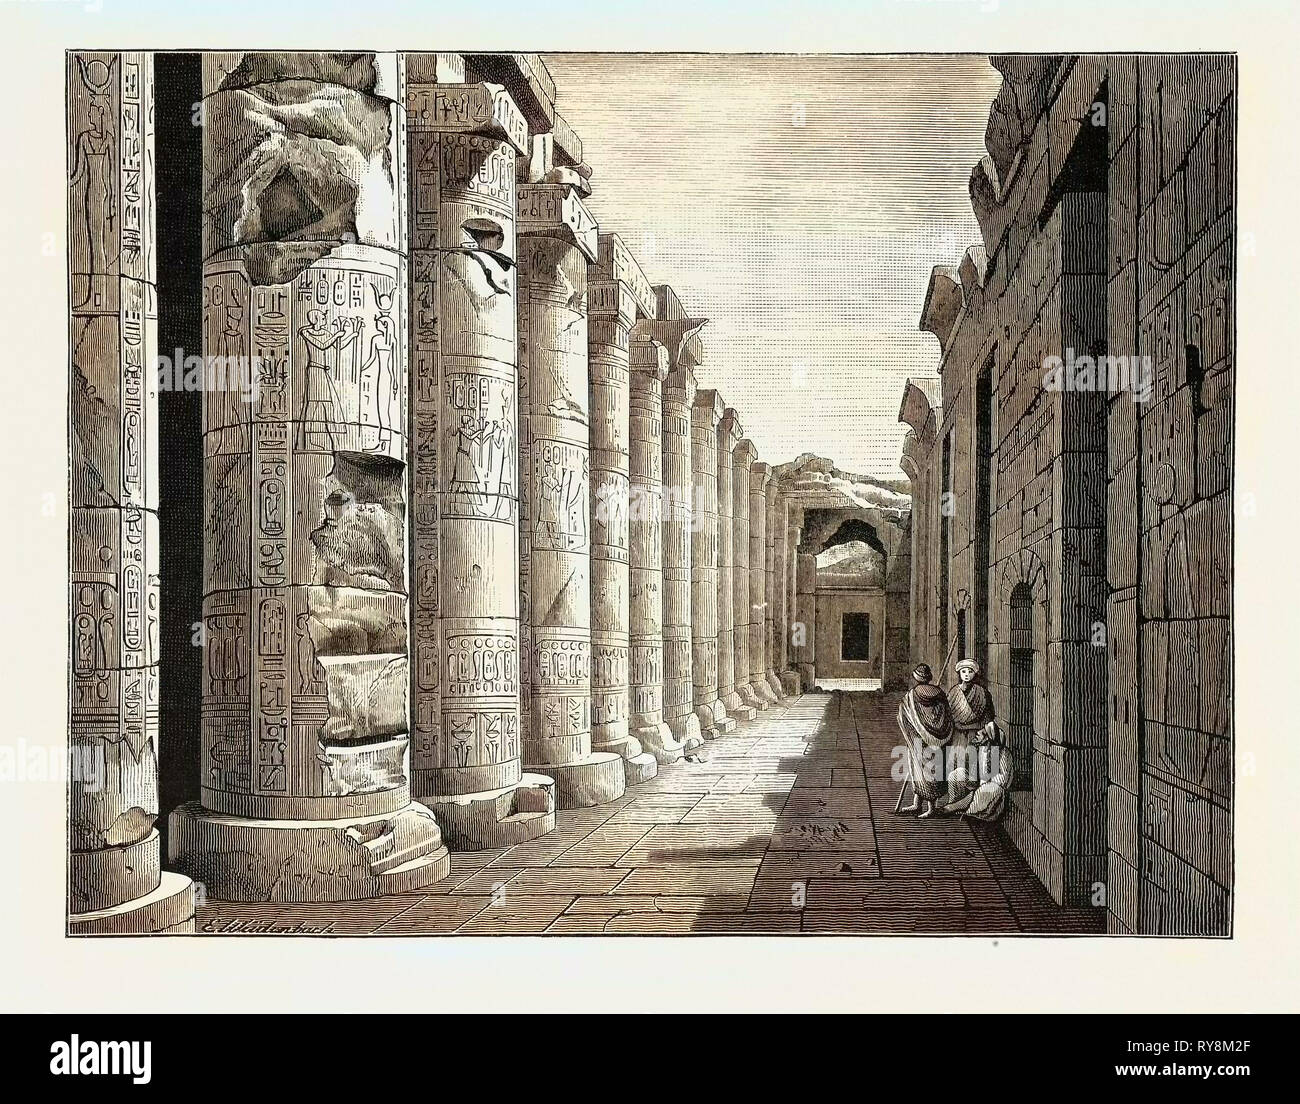 GREAT HALL OF ABYDOS. Egypt, engraving 1879 Stock Photo